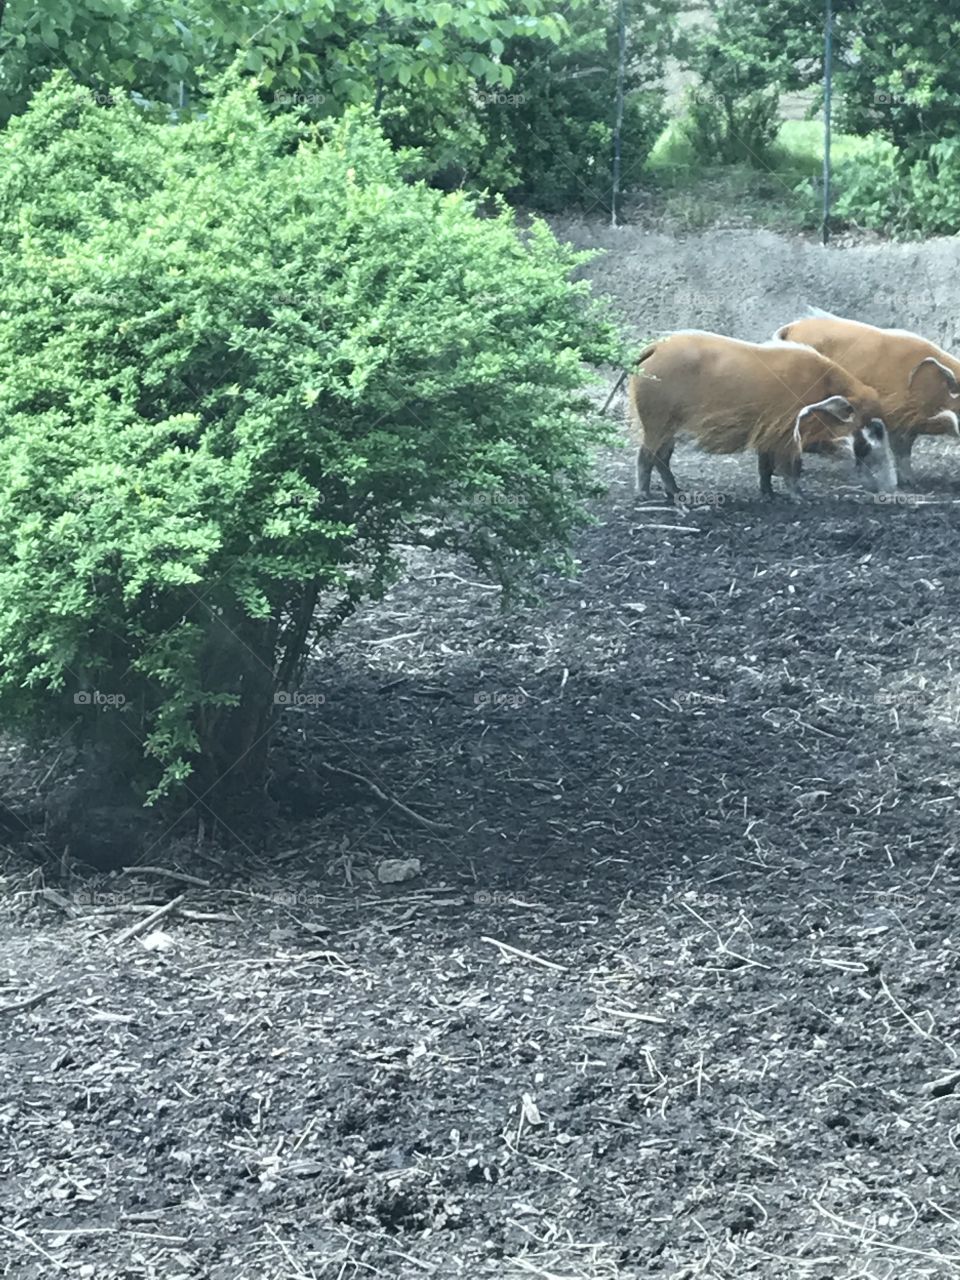 A trip to the zoo led to this photo of some red river hogs enjoying their evening snack!